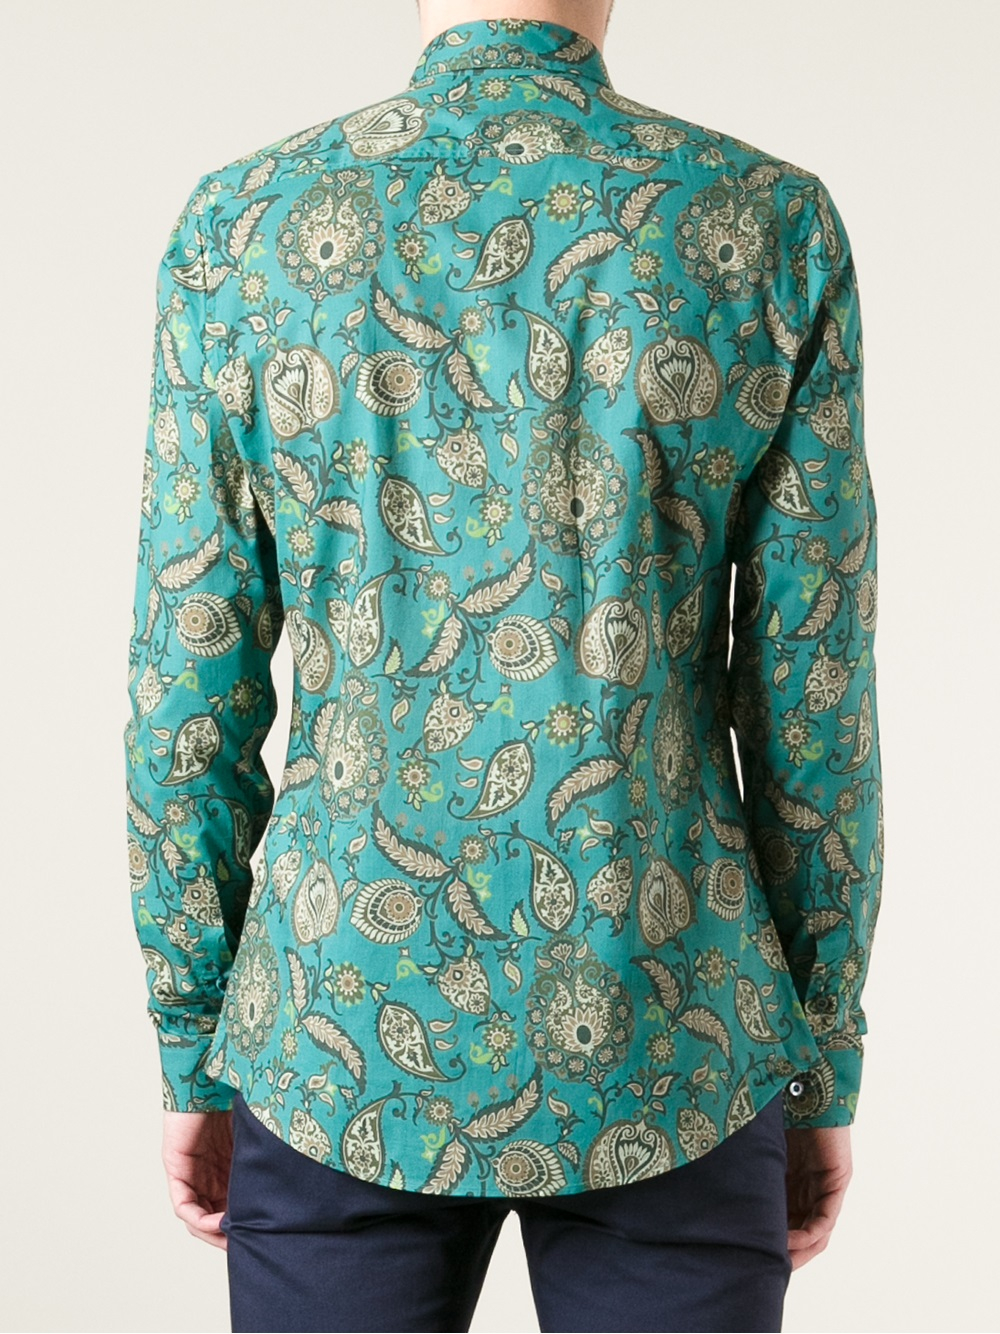 Gucci Paisley Print Shirt in Green for Men - Lyst